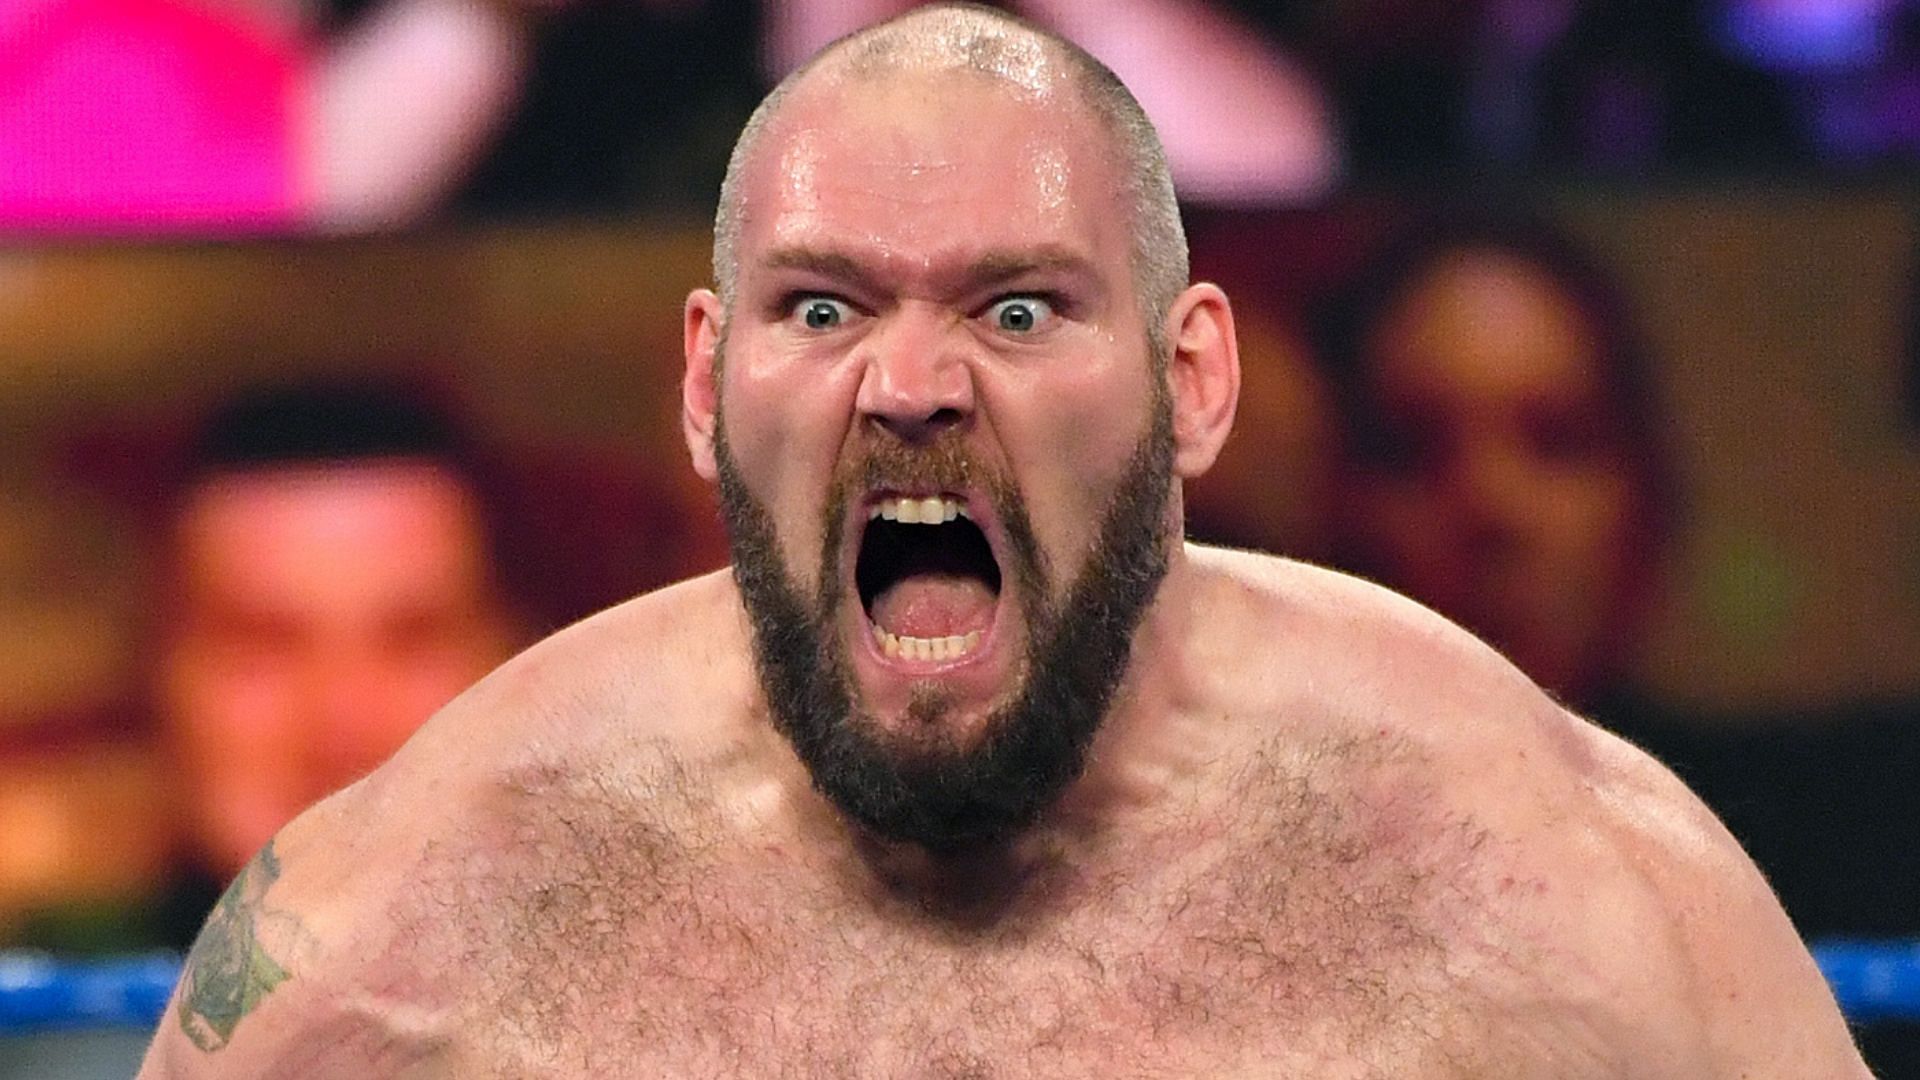 Lars Sullivan worked for WWE between 2013 and 2021